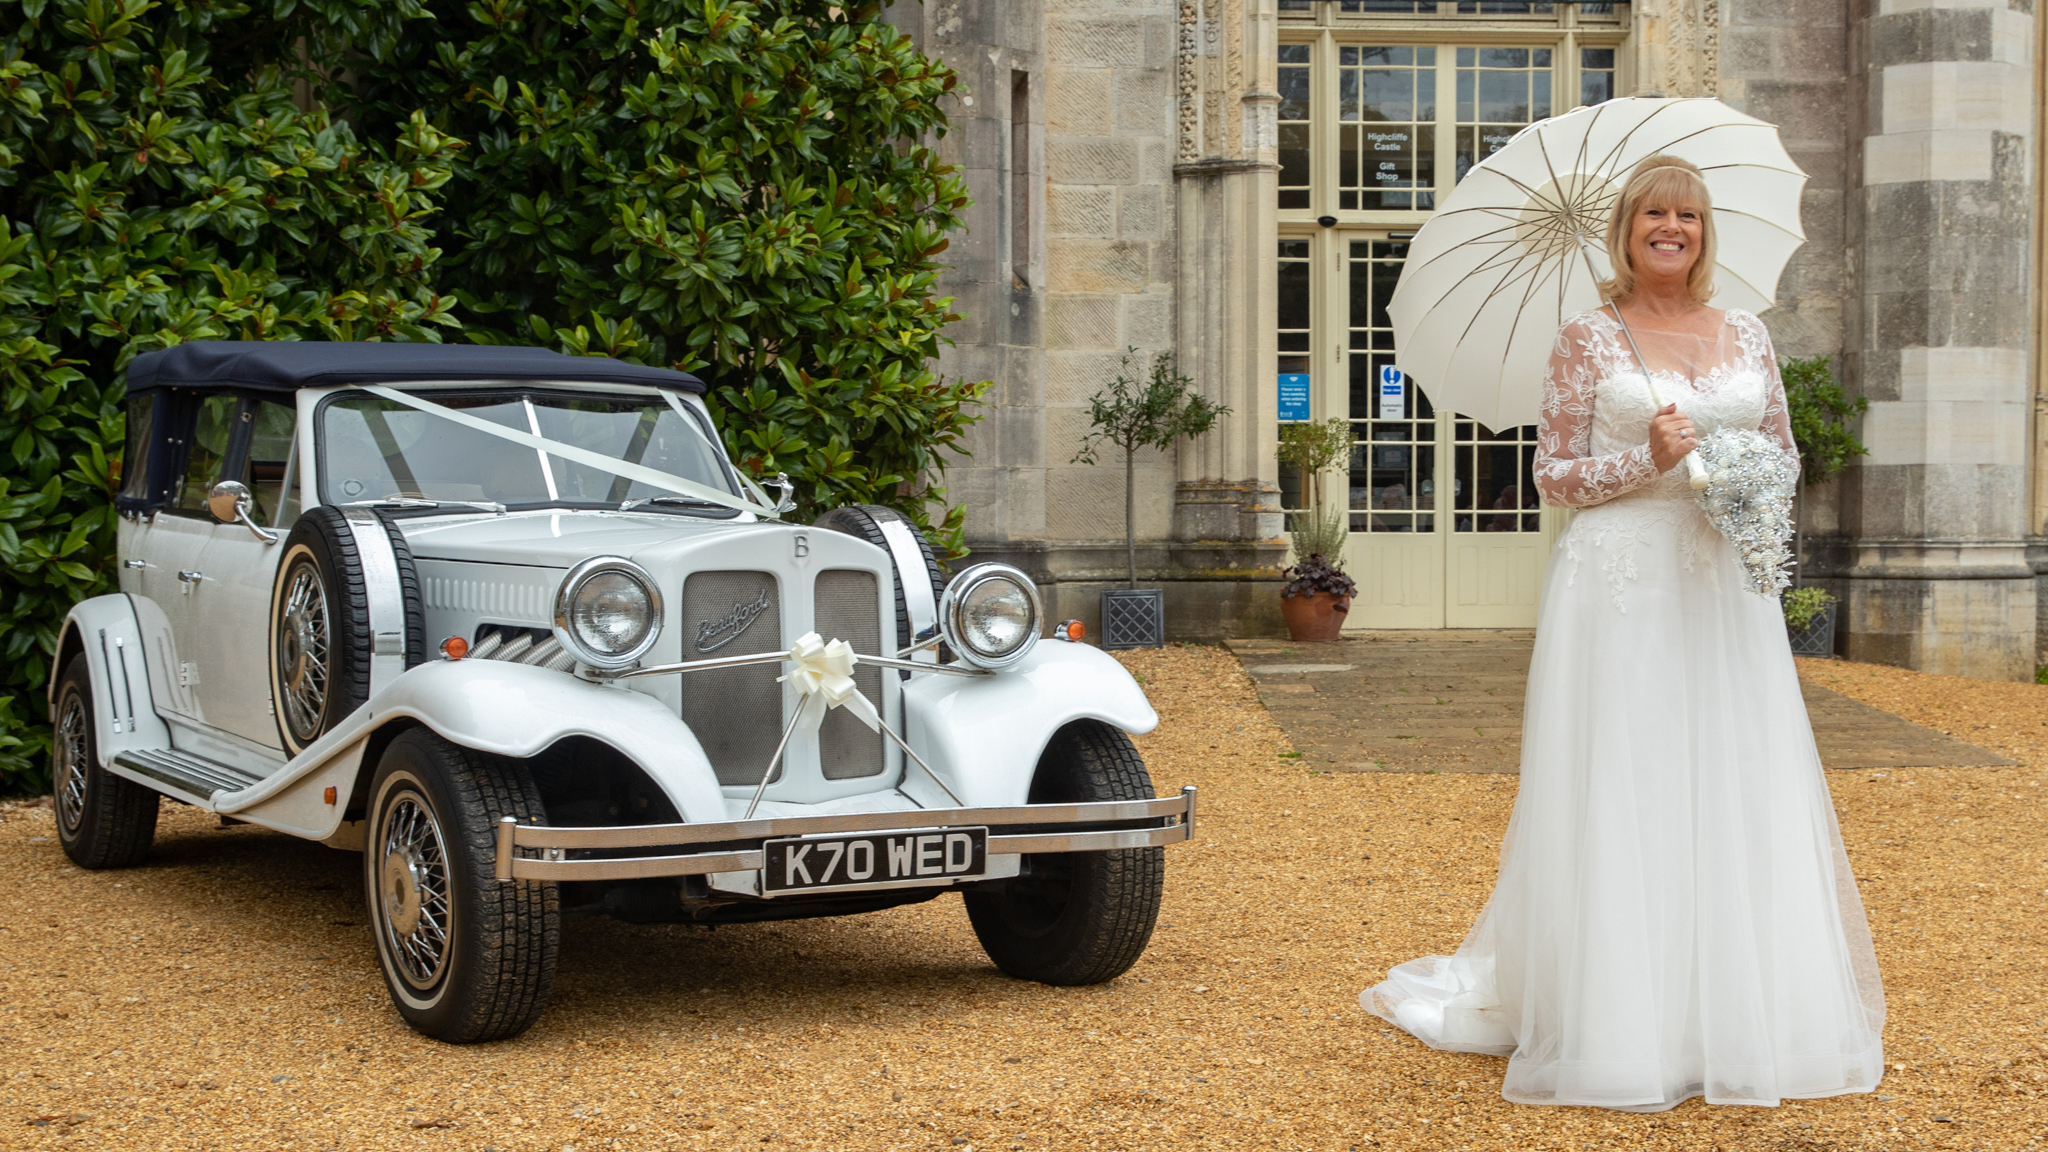 White vintage Beauford convertible with roof up decorated with white ribbon and bow at a local Aylesford wedding. Smiling bride standing next to the vehicle with a white umbrella h